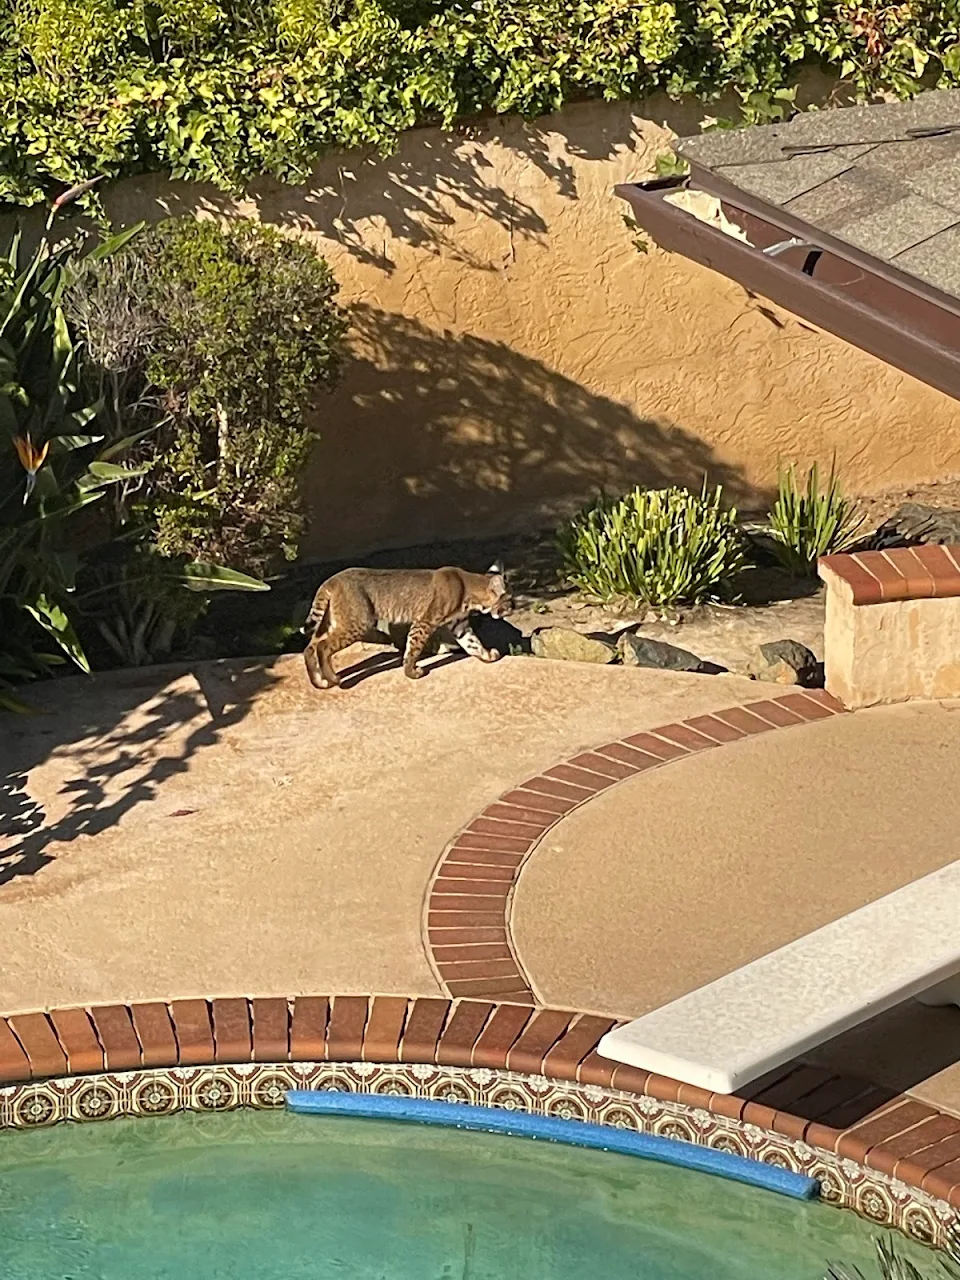 This kitty has been lurking in the backyard for a couple hours now. San Diego, CA